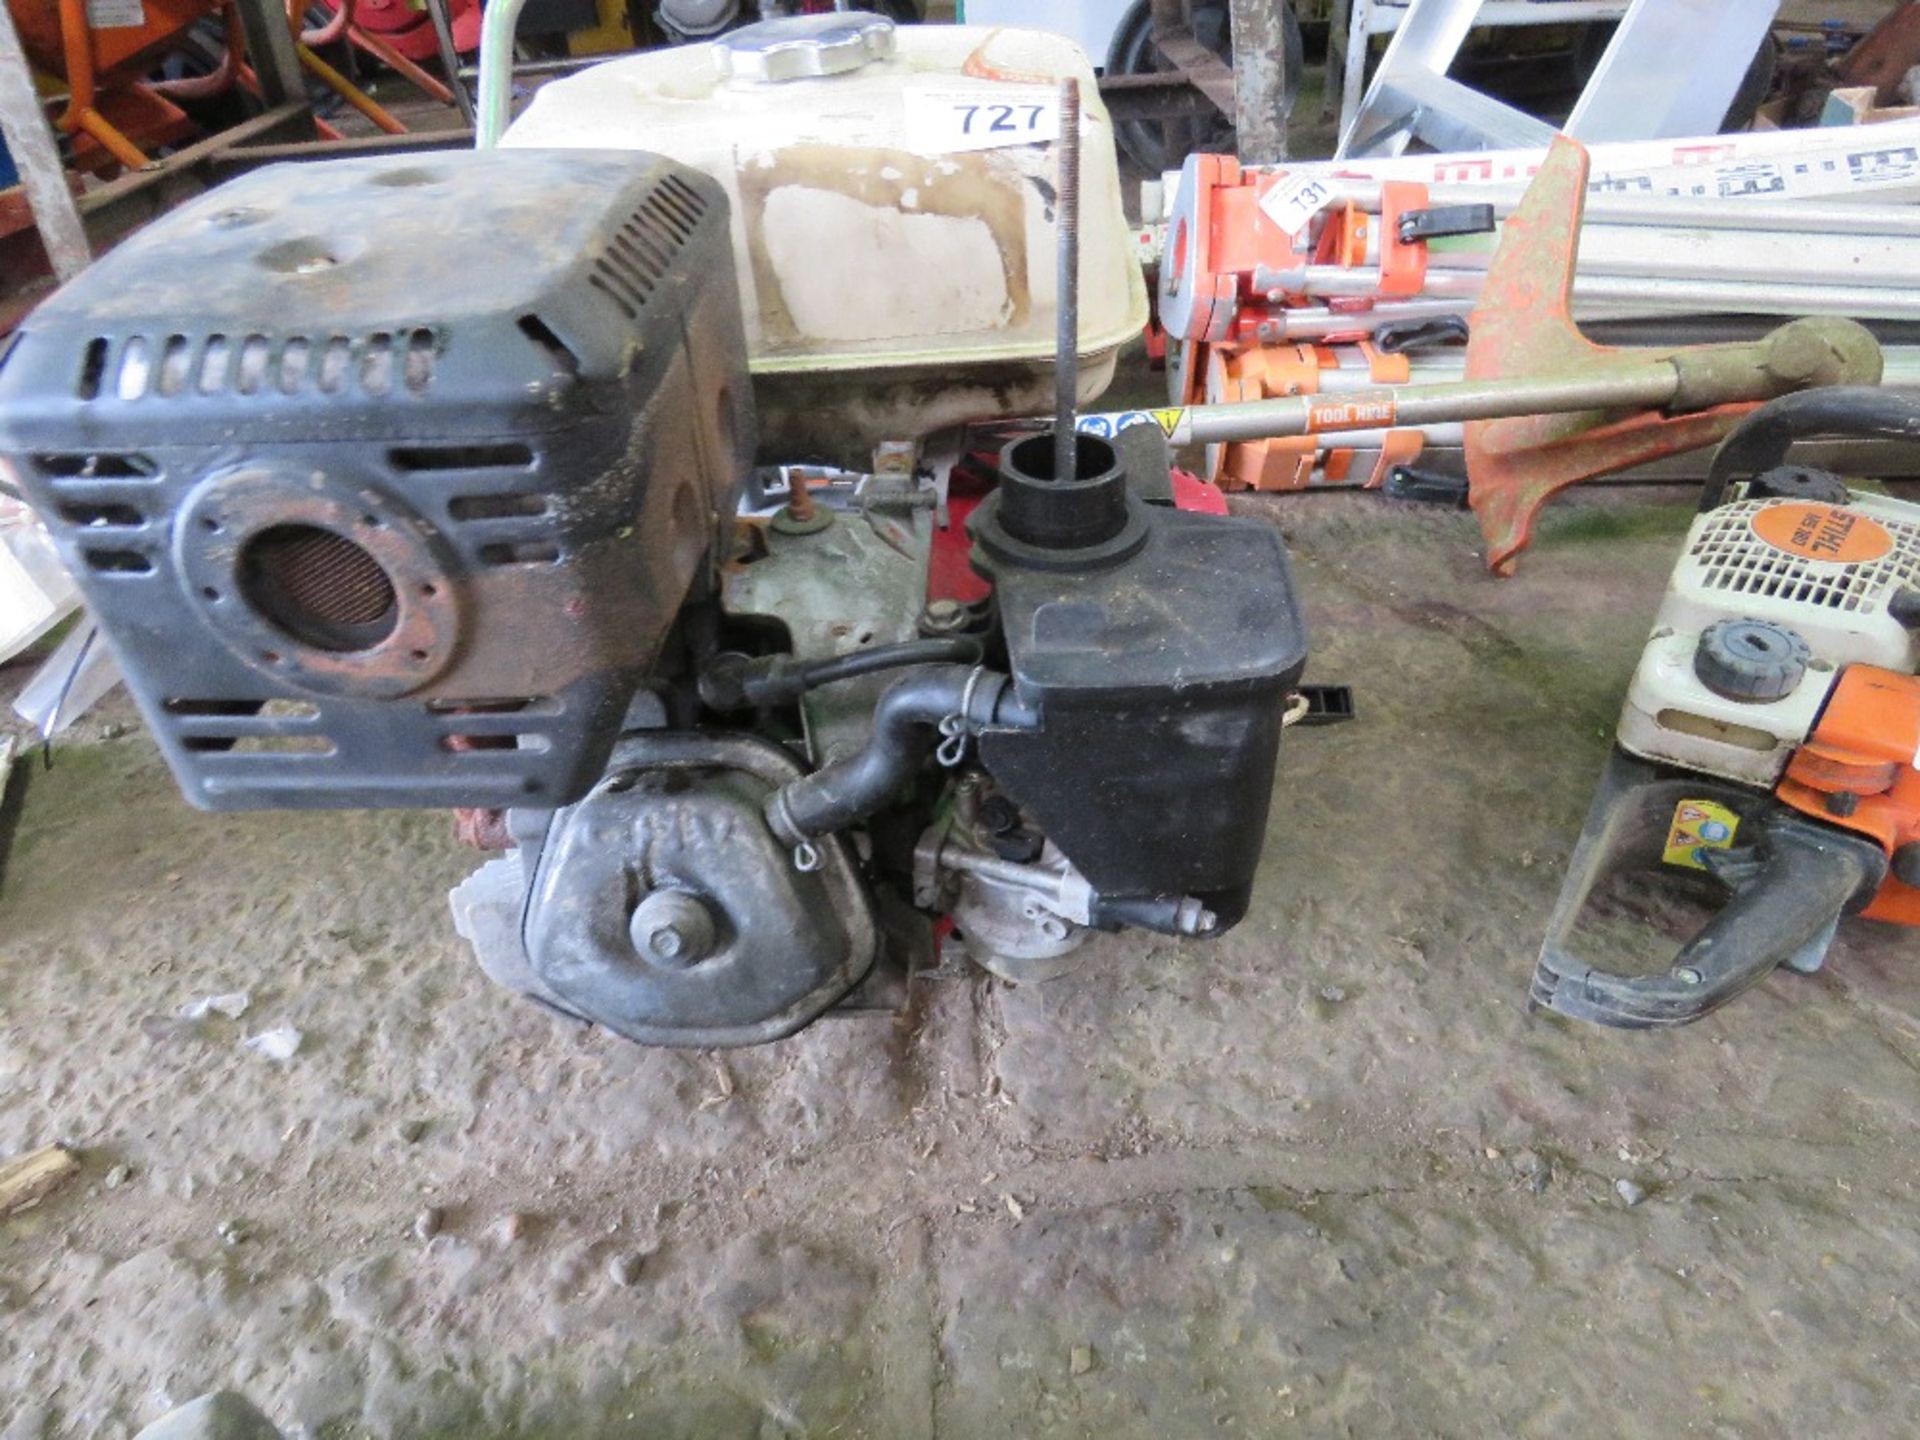 LARGE SIZED HONDA TYPE ENGINE. THIS LOT IS SOLD UNDER THE AUCTIONEERS MARGIN SCHEME, THEREFORE NO - Image 2 of 4